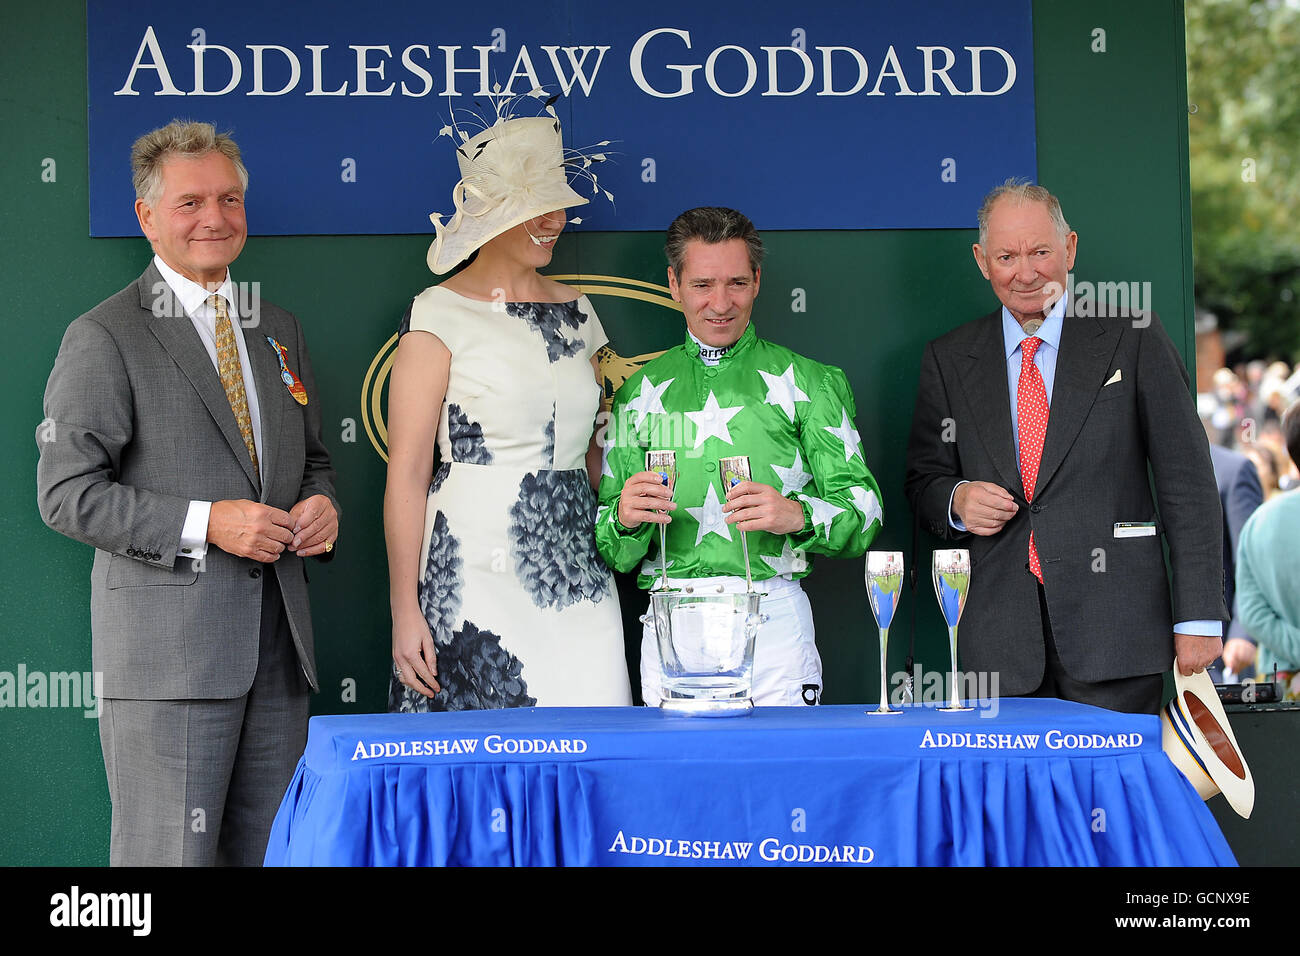 Horse Racing - Yorkshire Ebor Festival - Darley Yorkshire Oaks and Ladies Day - York Racecourse. Jockey Michael Hills (3rd left) after winning the Addleshaw Goddard Stakes on Ransom Note Stock Photo